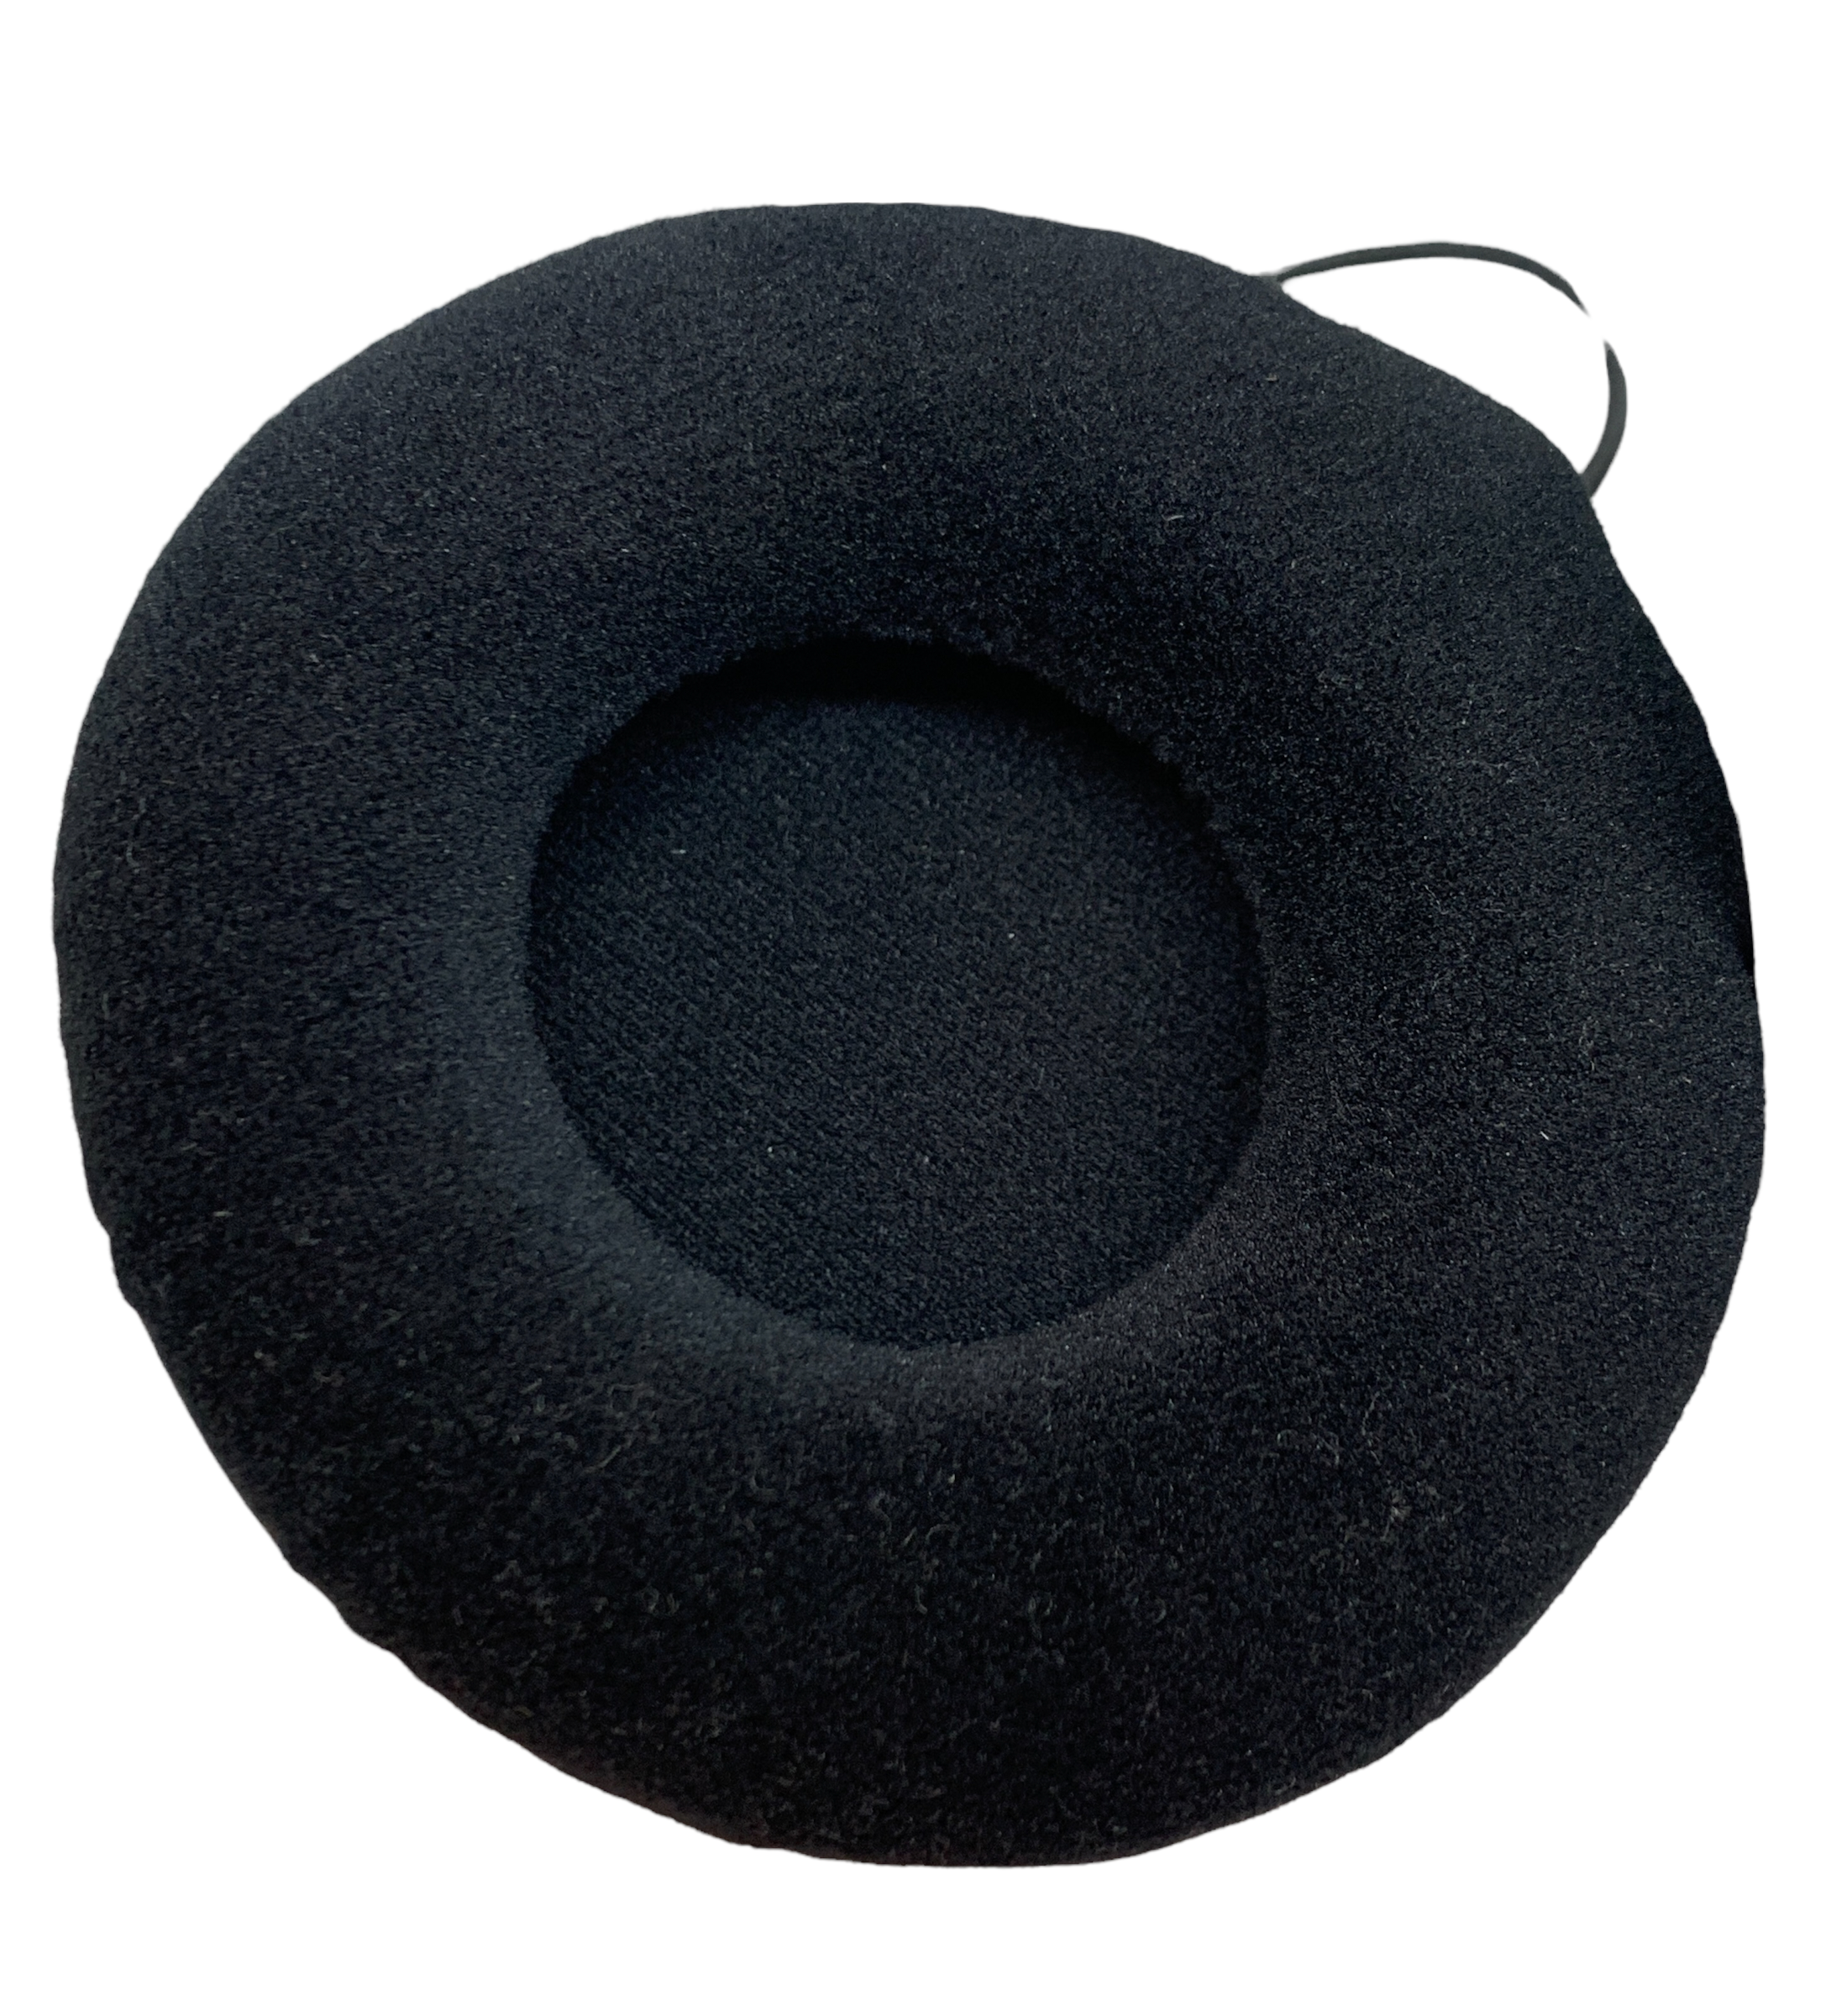 CentralSound USA Velour Replacement Ear Pads for Beyerdynamic DT770 880 990 PRO Headphones - CentralSound